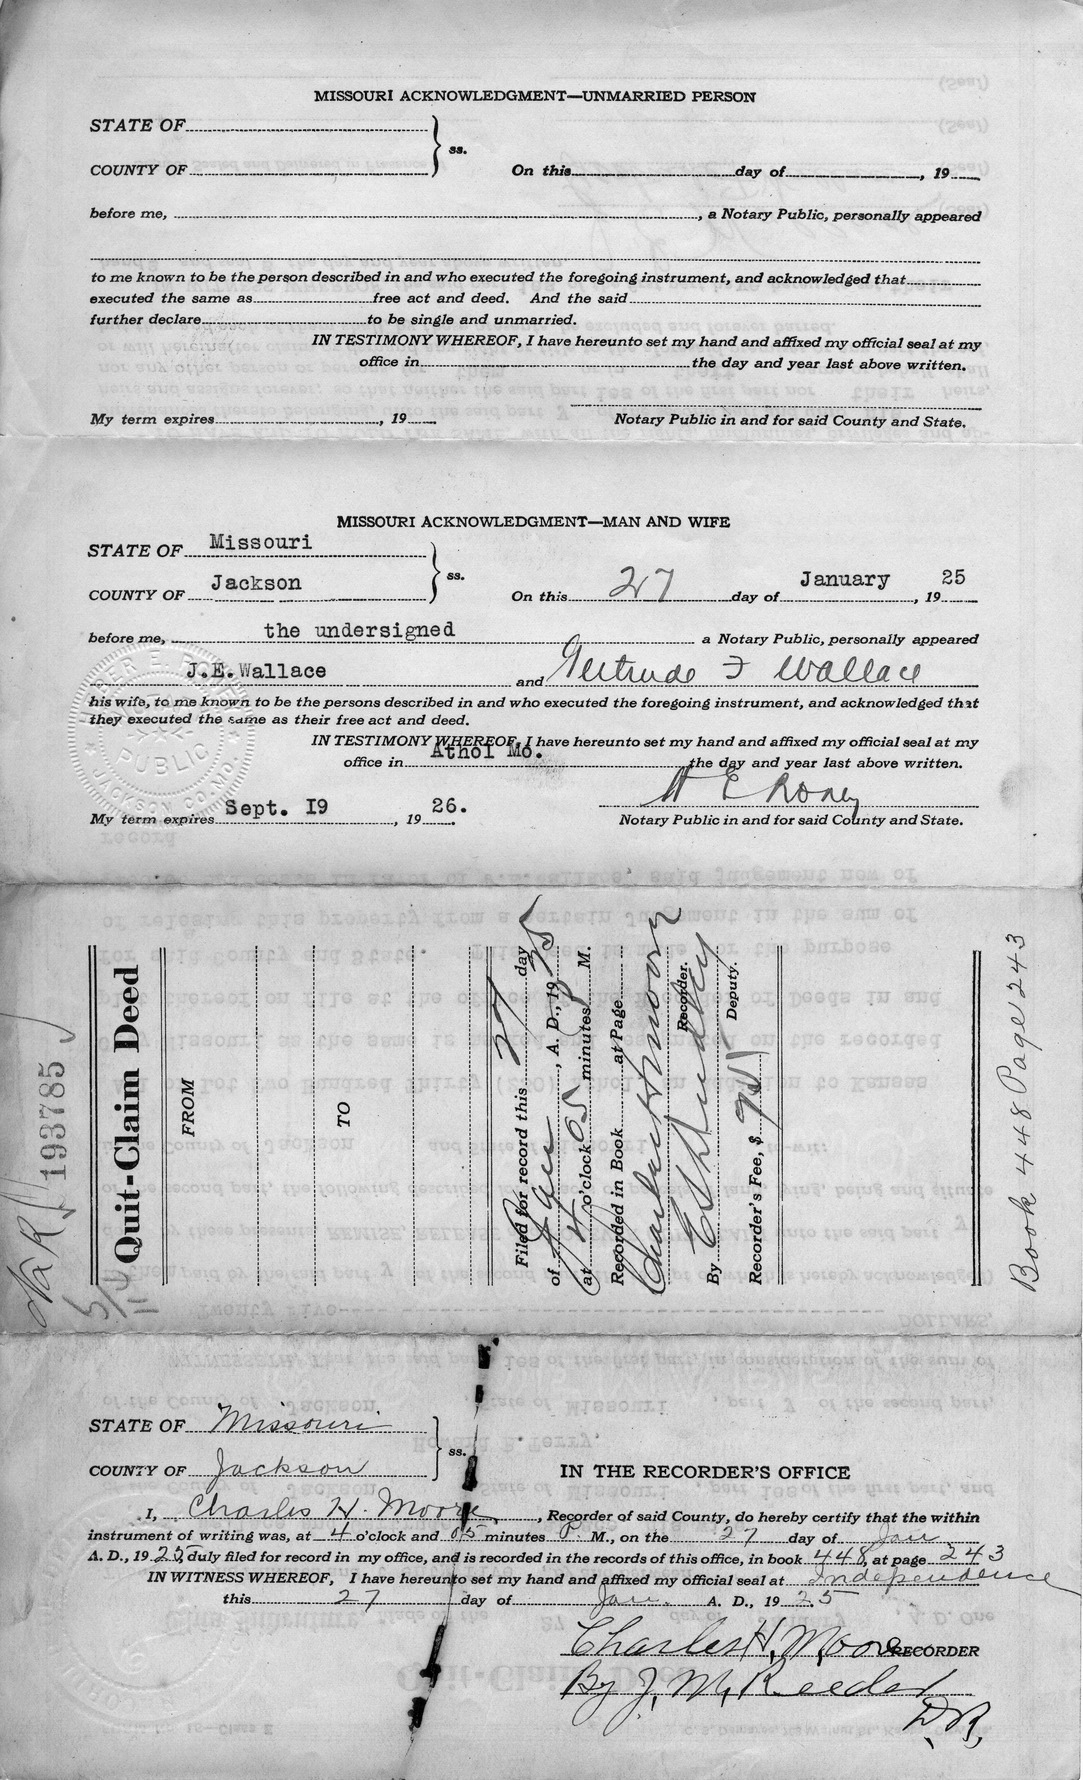 Quit-Claim Deed from J. E. Wallace and Gertrude F. Wallace to Howard B. Terry